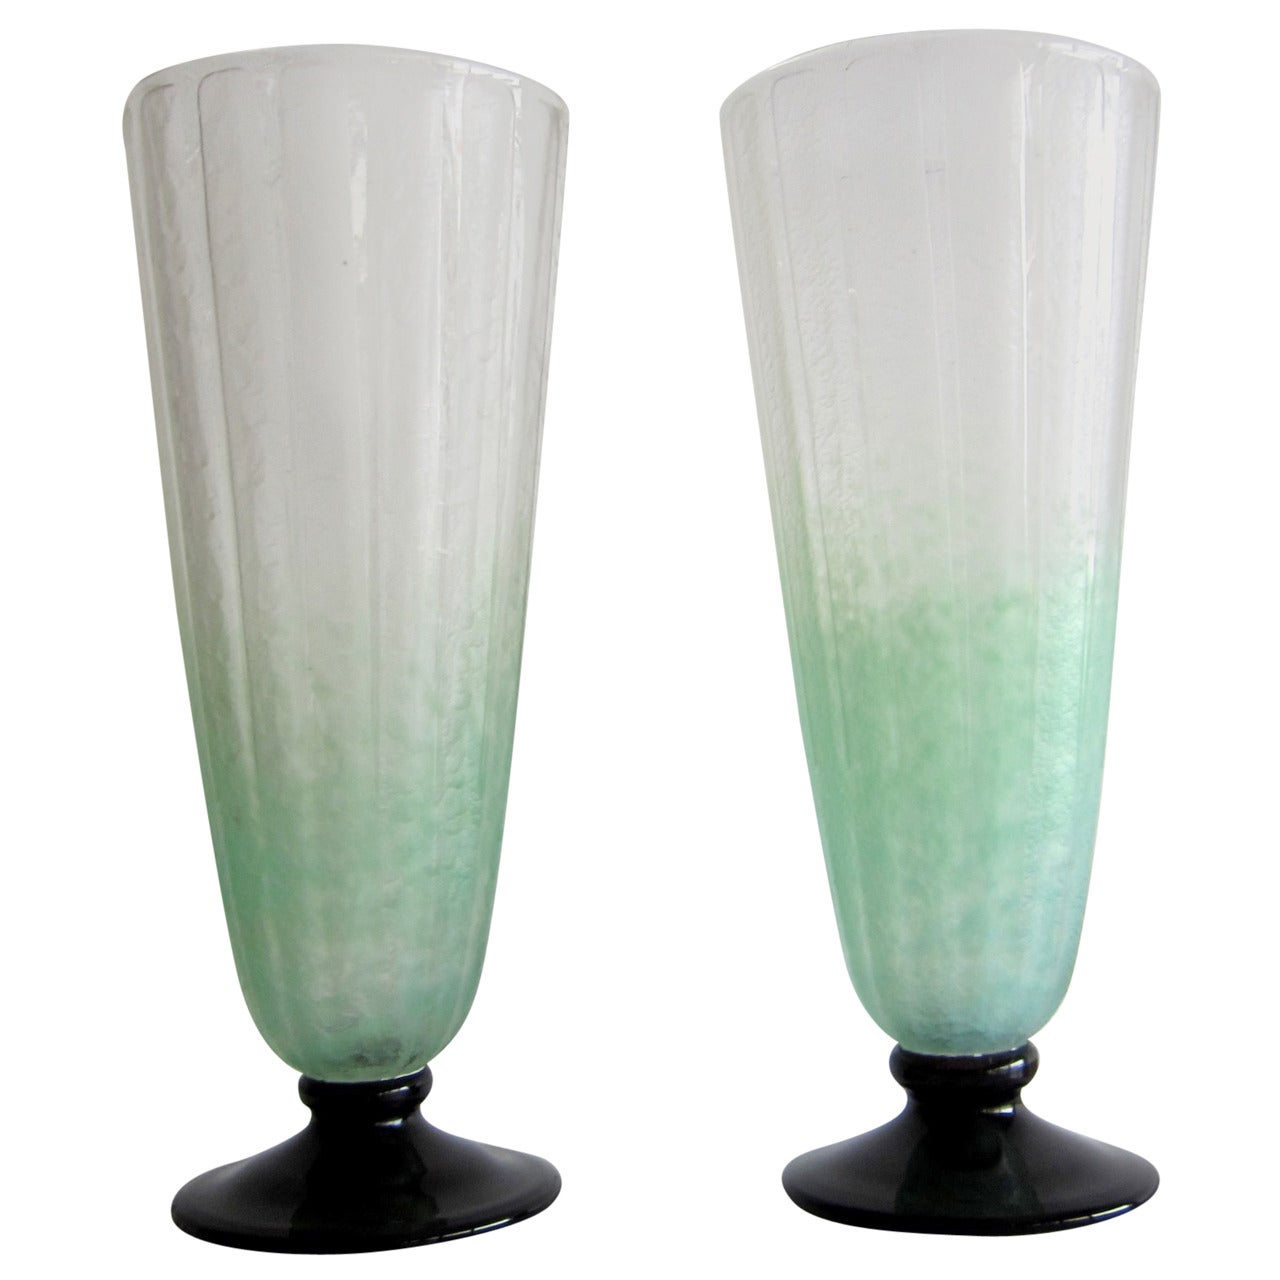 Pair of Art Deco Pale Green Frosted Glass Vases by Schneider